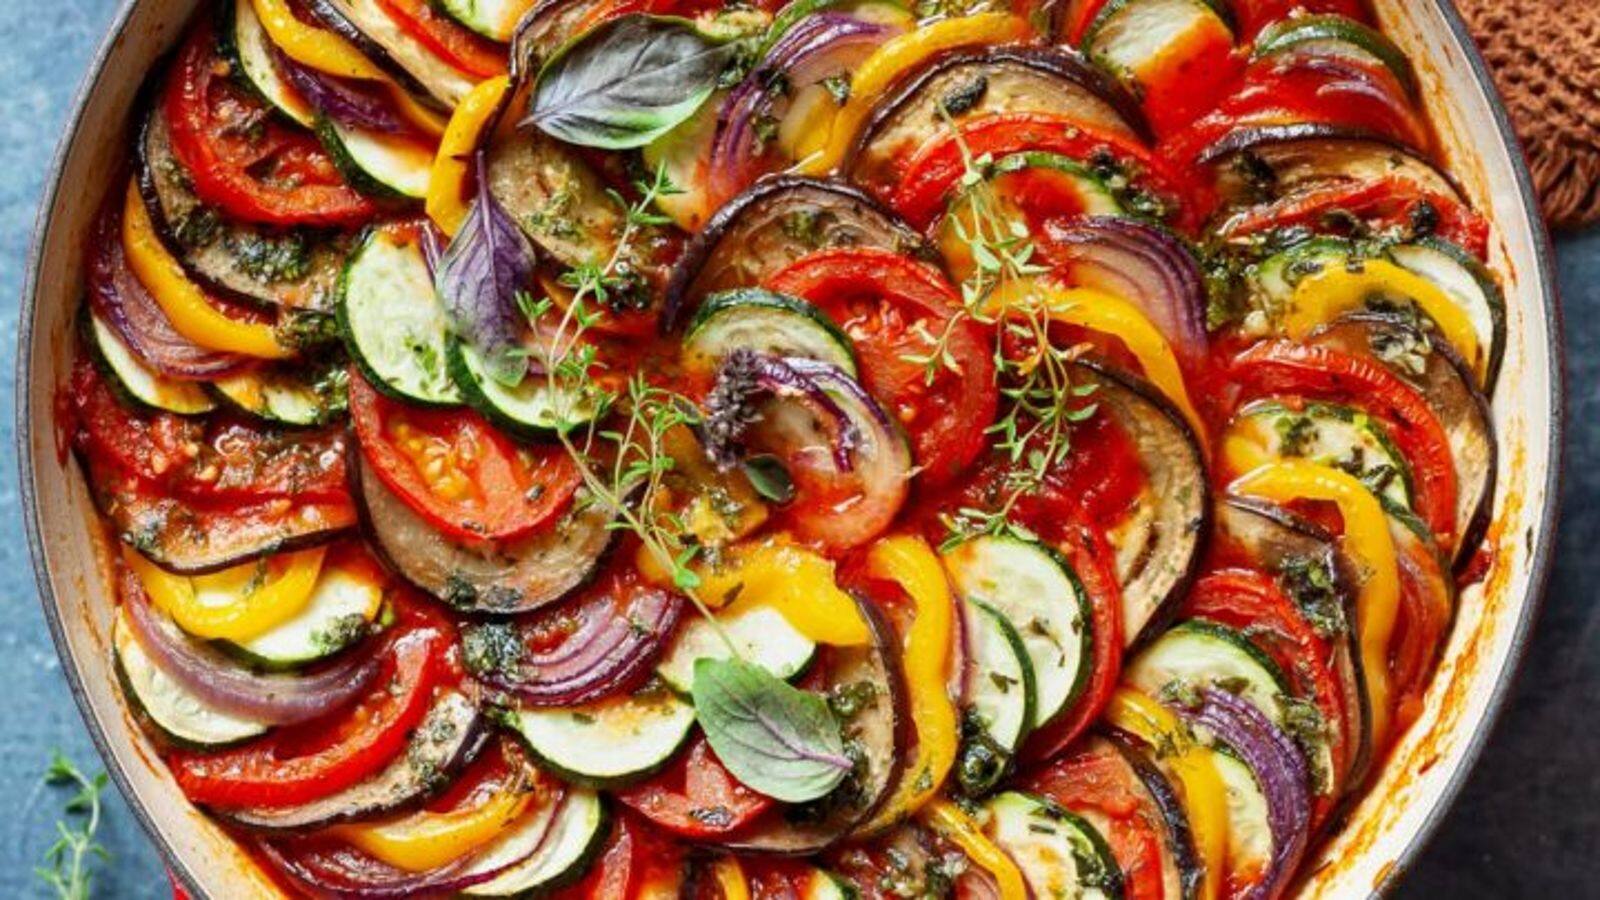 Mastering the art of cooking ratatouille with this easy-peasy recipe